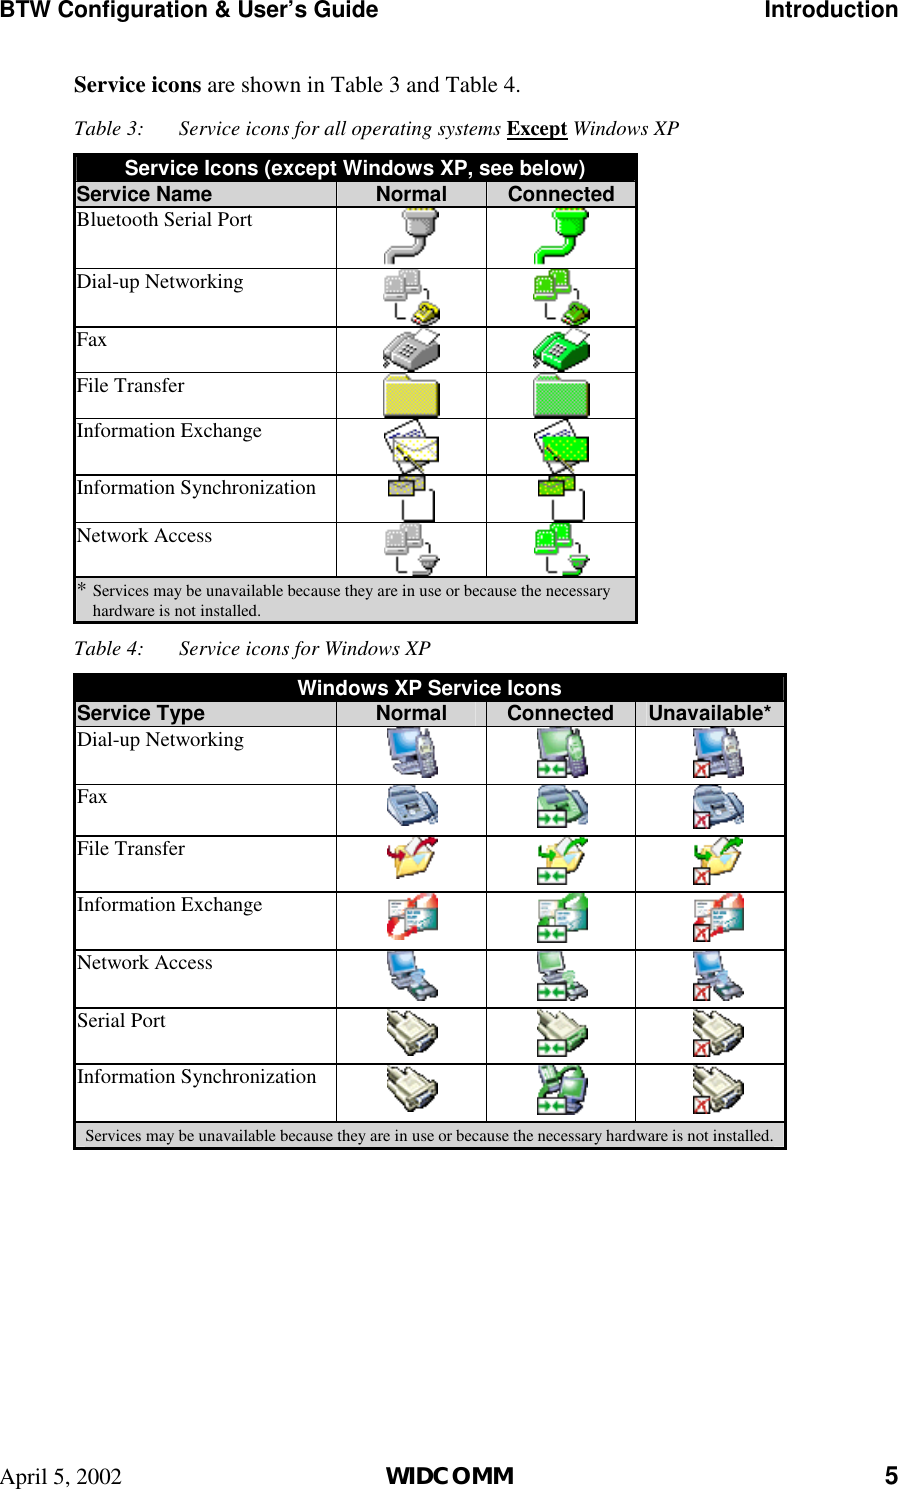 BTW Configuration &amp; User’s Guide    Introduction April 5, 2002  WIDCOMM 5 Service icons are shown in Table 3 and Table 4. Table 3:  Service icons for all operating systems Except Windows XP Service Icons (except Windows XP, see below) Service Name  Normal  Connected Bluetooth Serial Port    Dial-up Networking    Fax    File Transfer    Information Exchange    Information Synchronization    Network Access    * Services may be unavailable because they are in use or because the necessary hardware is not installed. Table 4:  Service icons for Windows XP Windows XP Service Icons Service Type  Normal  Connected  Unavailable* Dial-up Networking      Fax     File Transfer      Information Exchange    Network Access      Serial Port     Information Synchronization    * Services may be unavailable because they are in use or because the necessary hardware is not installed.   